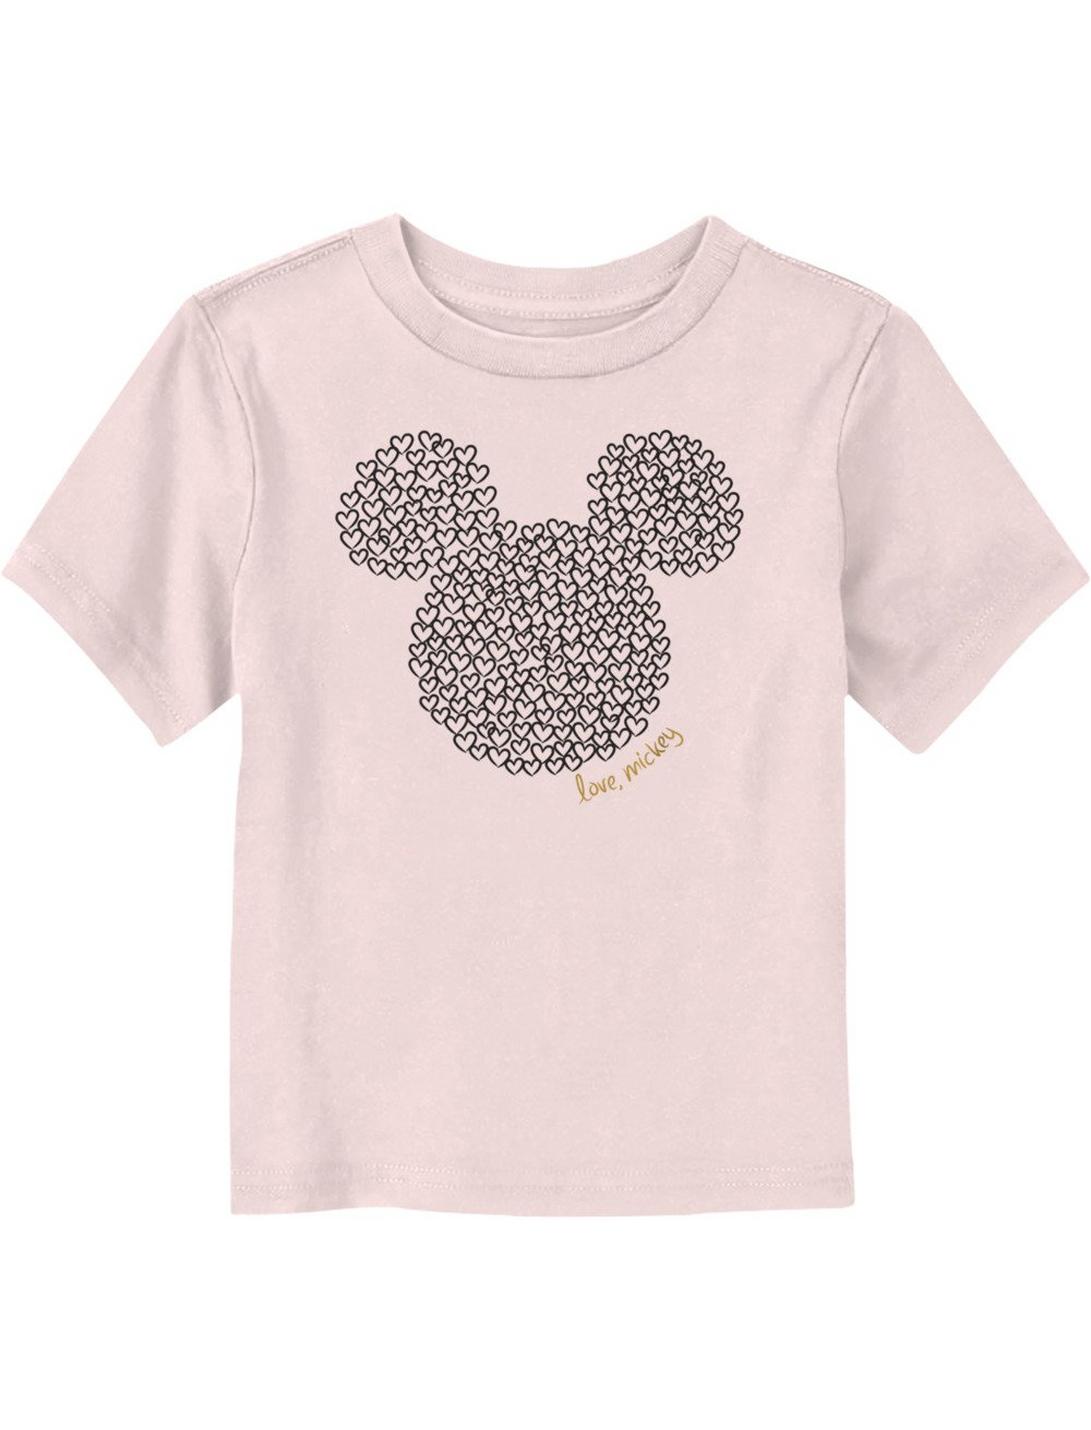 Disney Mickey Mouse Hearts Ears Toddler T-Shirt, LIGHT PINK, hi-res